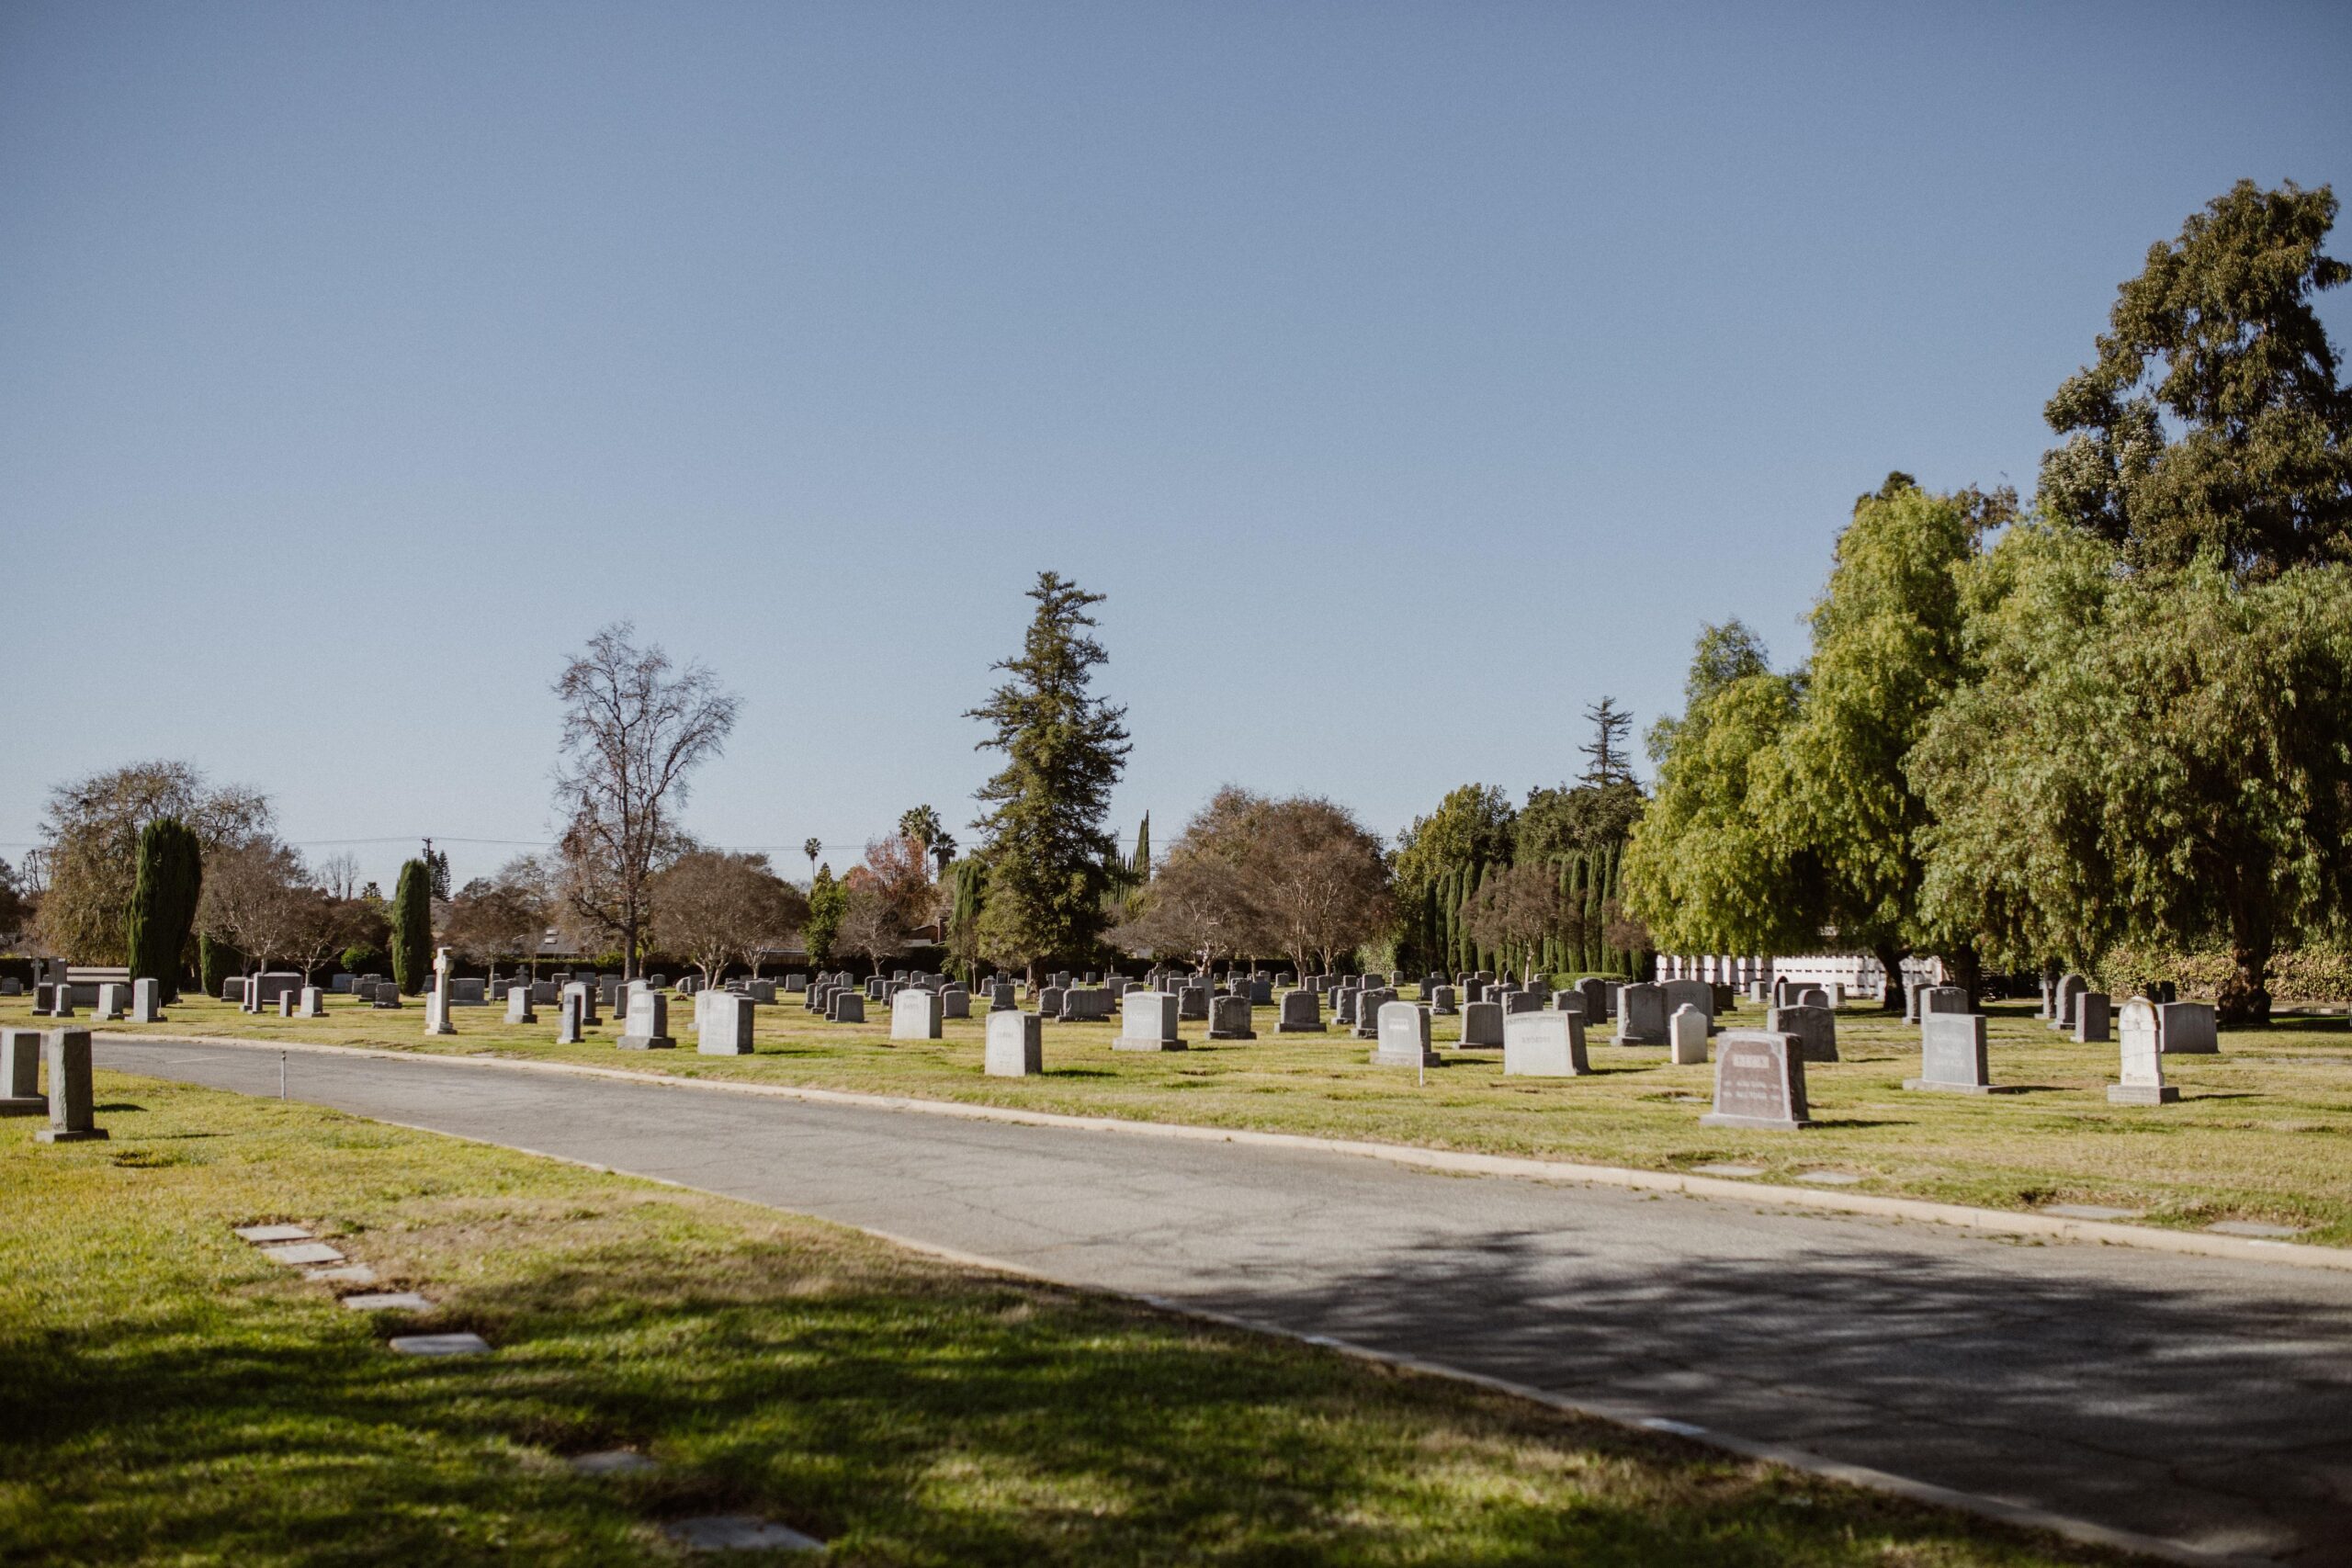 Image of a graveyard